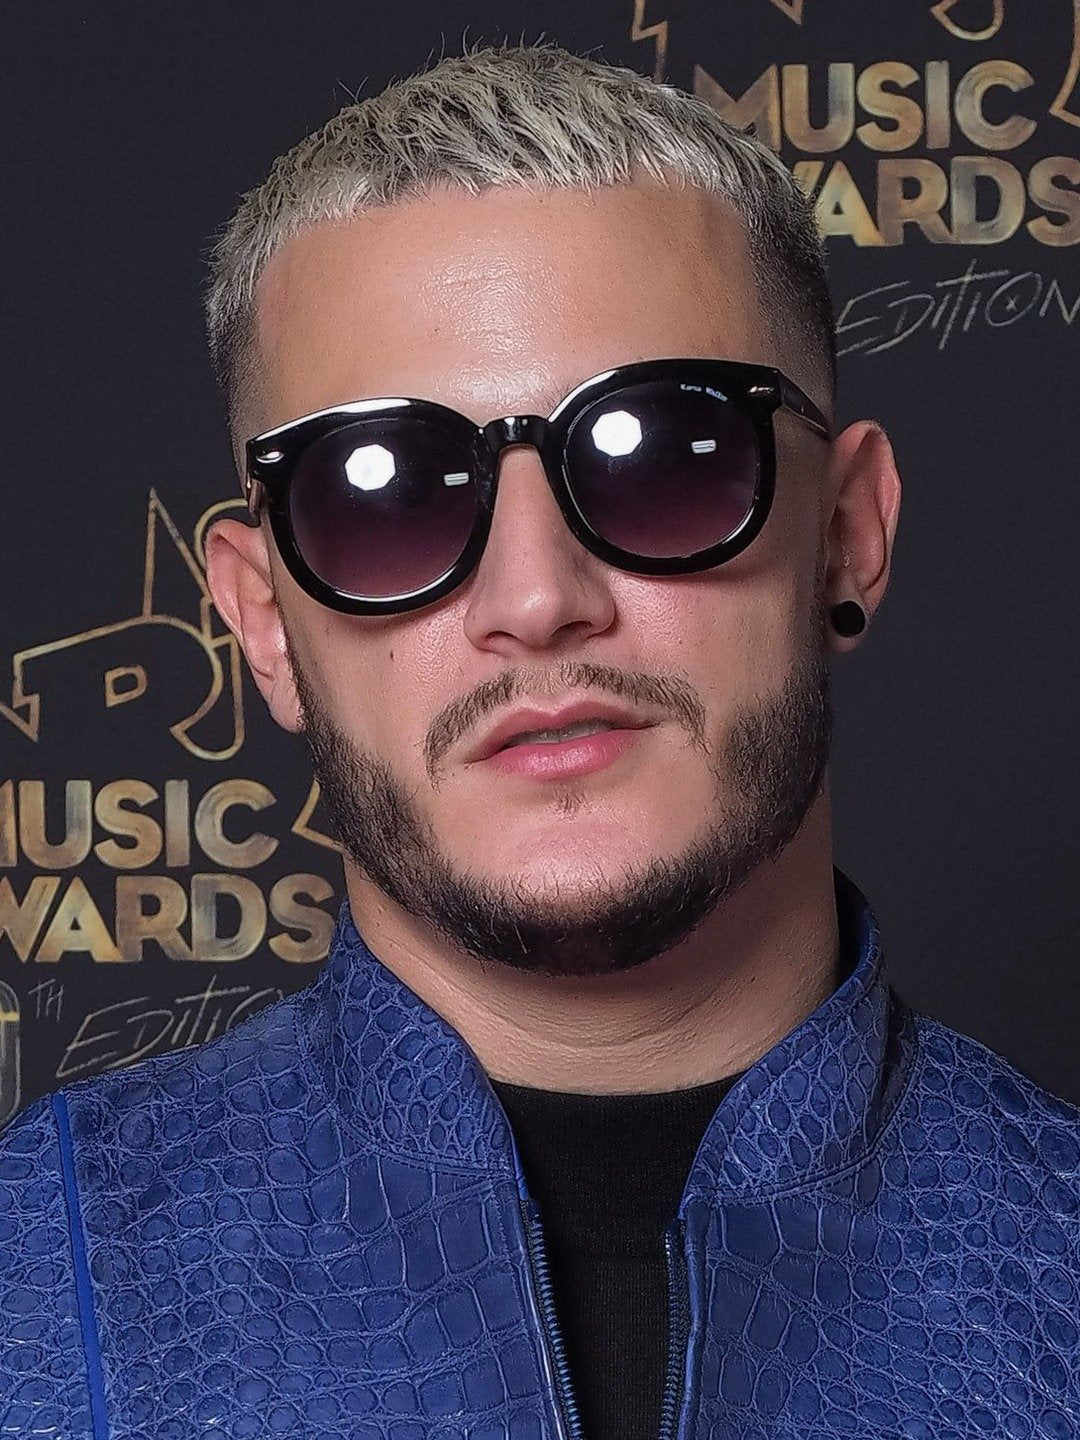 DJ Snake opens this year's EXIT with a worldwide hit of 16 billion